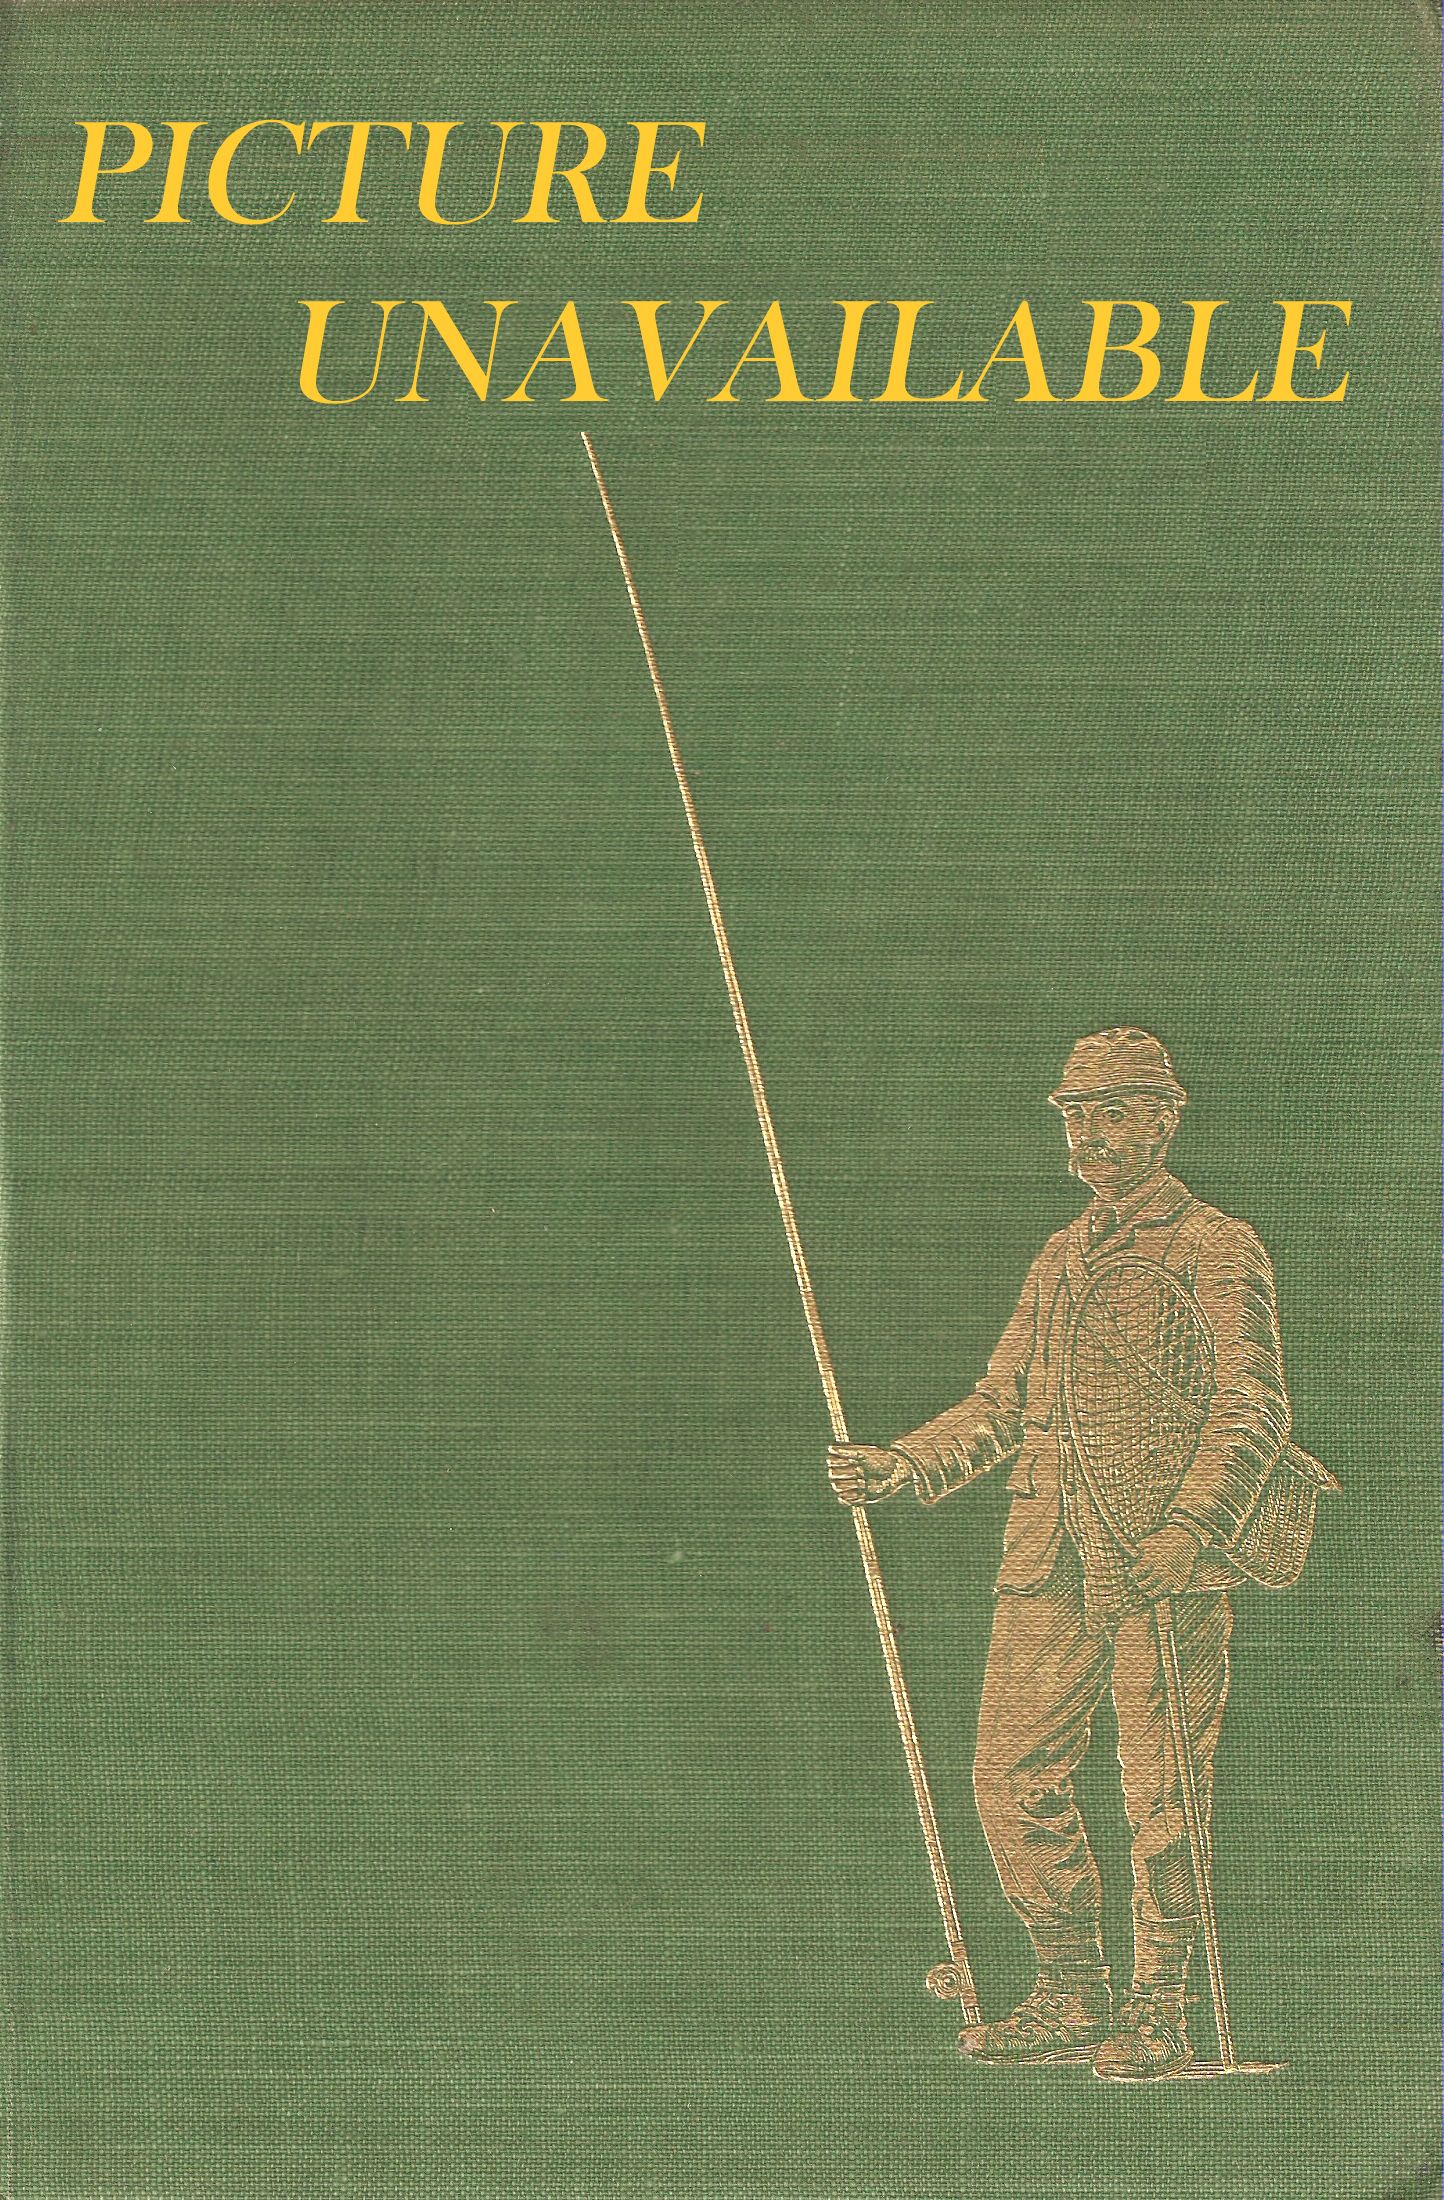 FLY-FISHING AND WORM-FISHING FOR SALMON, TROUT AND GRAYLING. By H.  Cholmondeley-Pennell. Late H.M. Inspector of Fisheries. Yellowback issue  of the first edition.